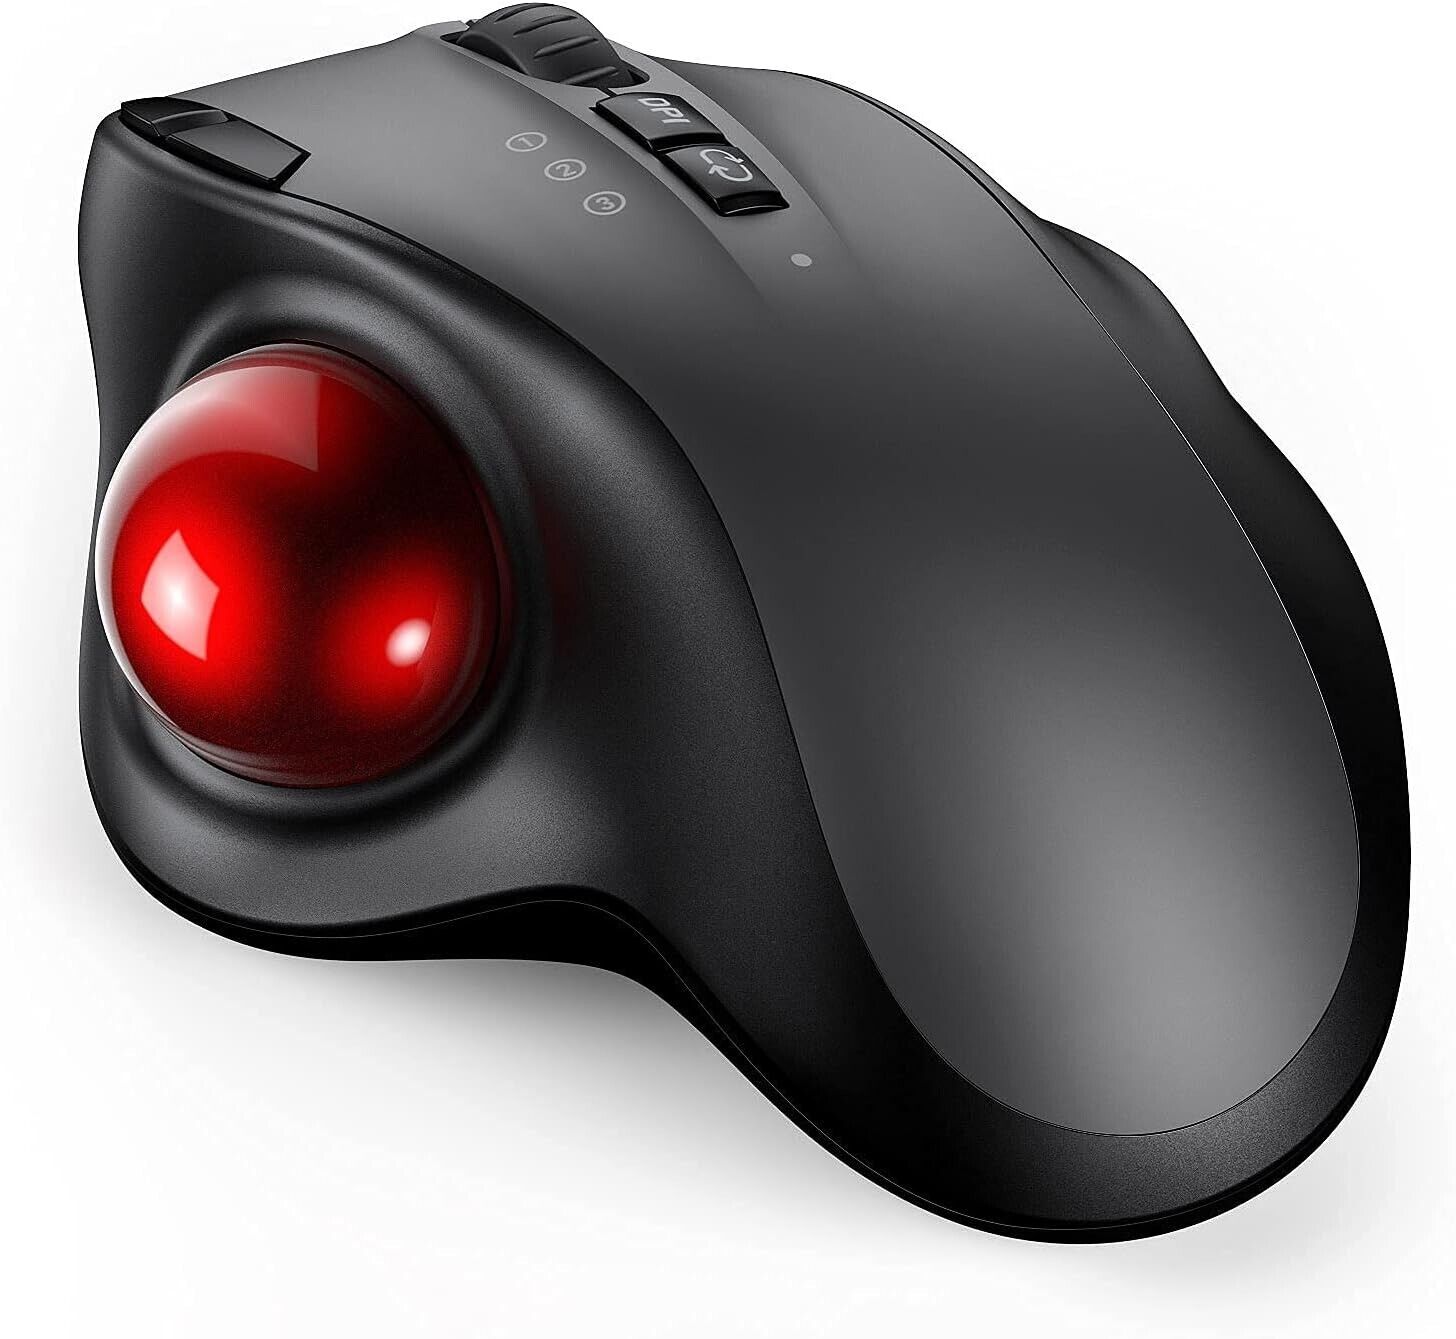 Wireless Trackball Mouse, USB & Bluetooth Rollerball Mouse, Easy Thumb Control